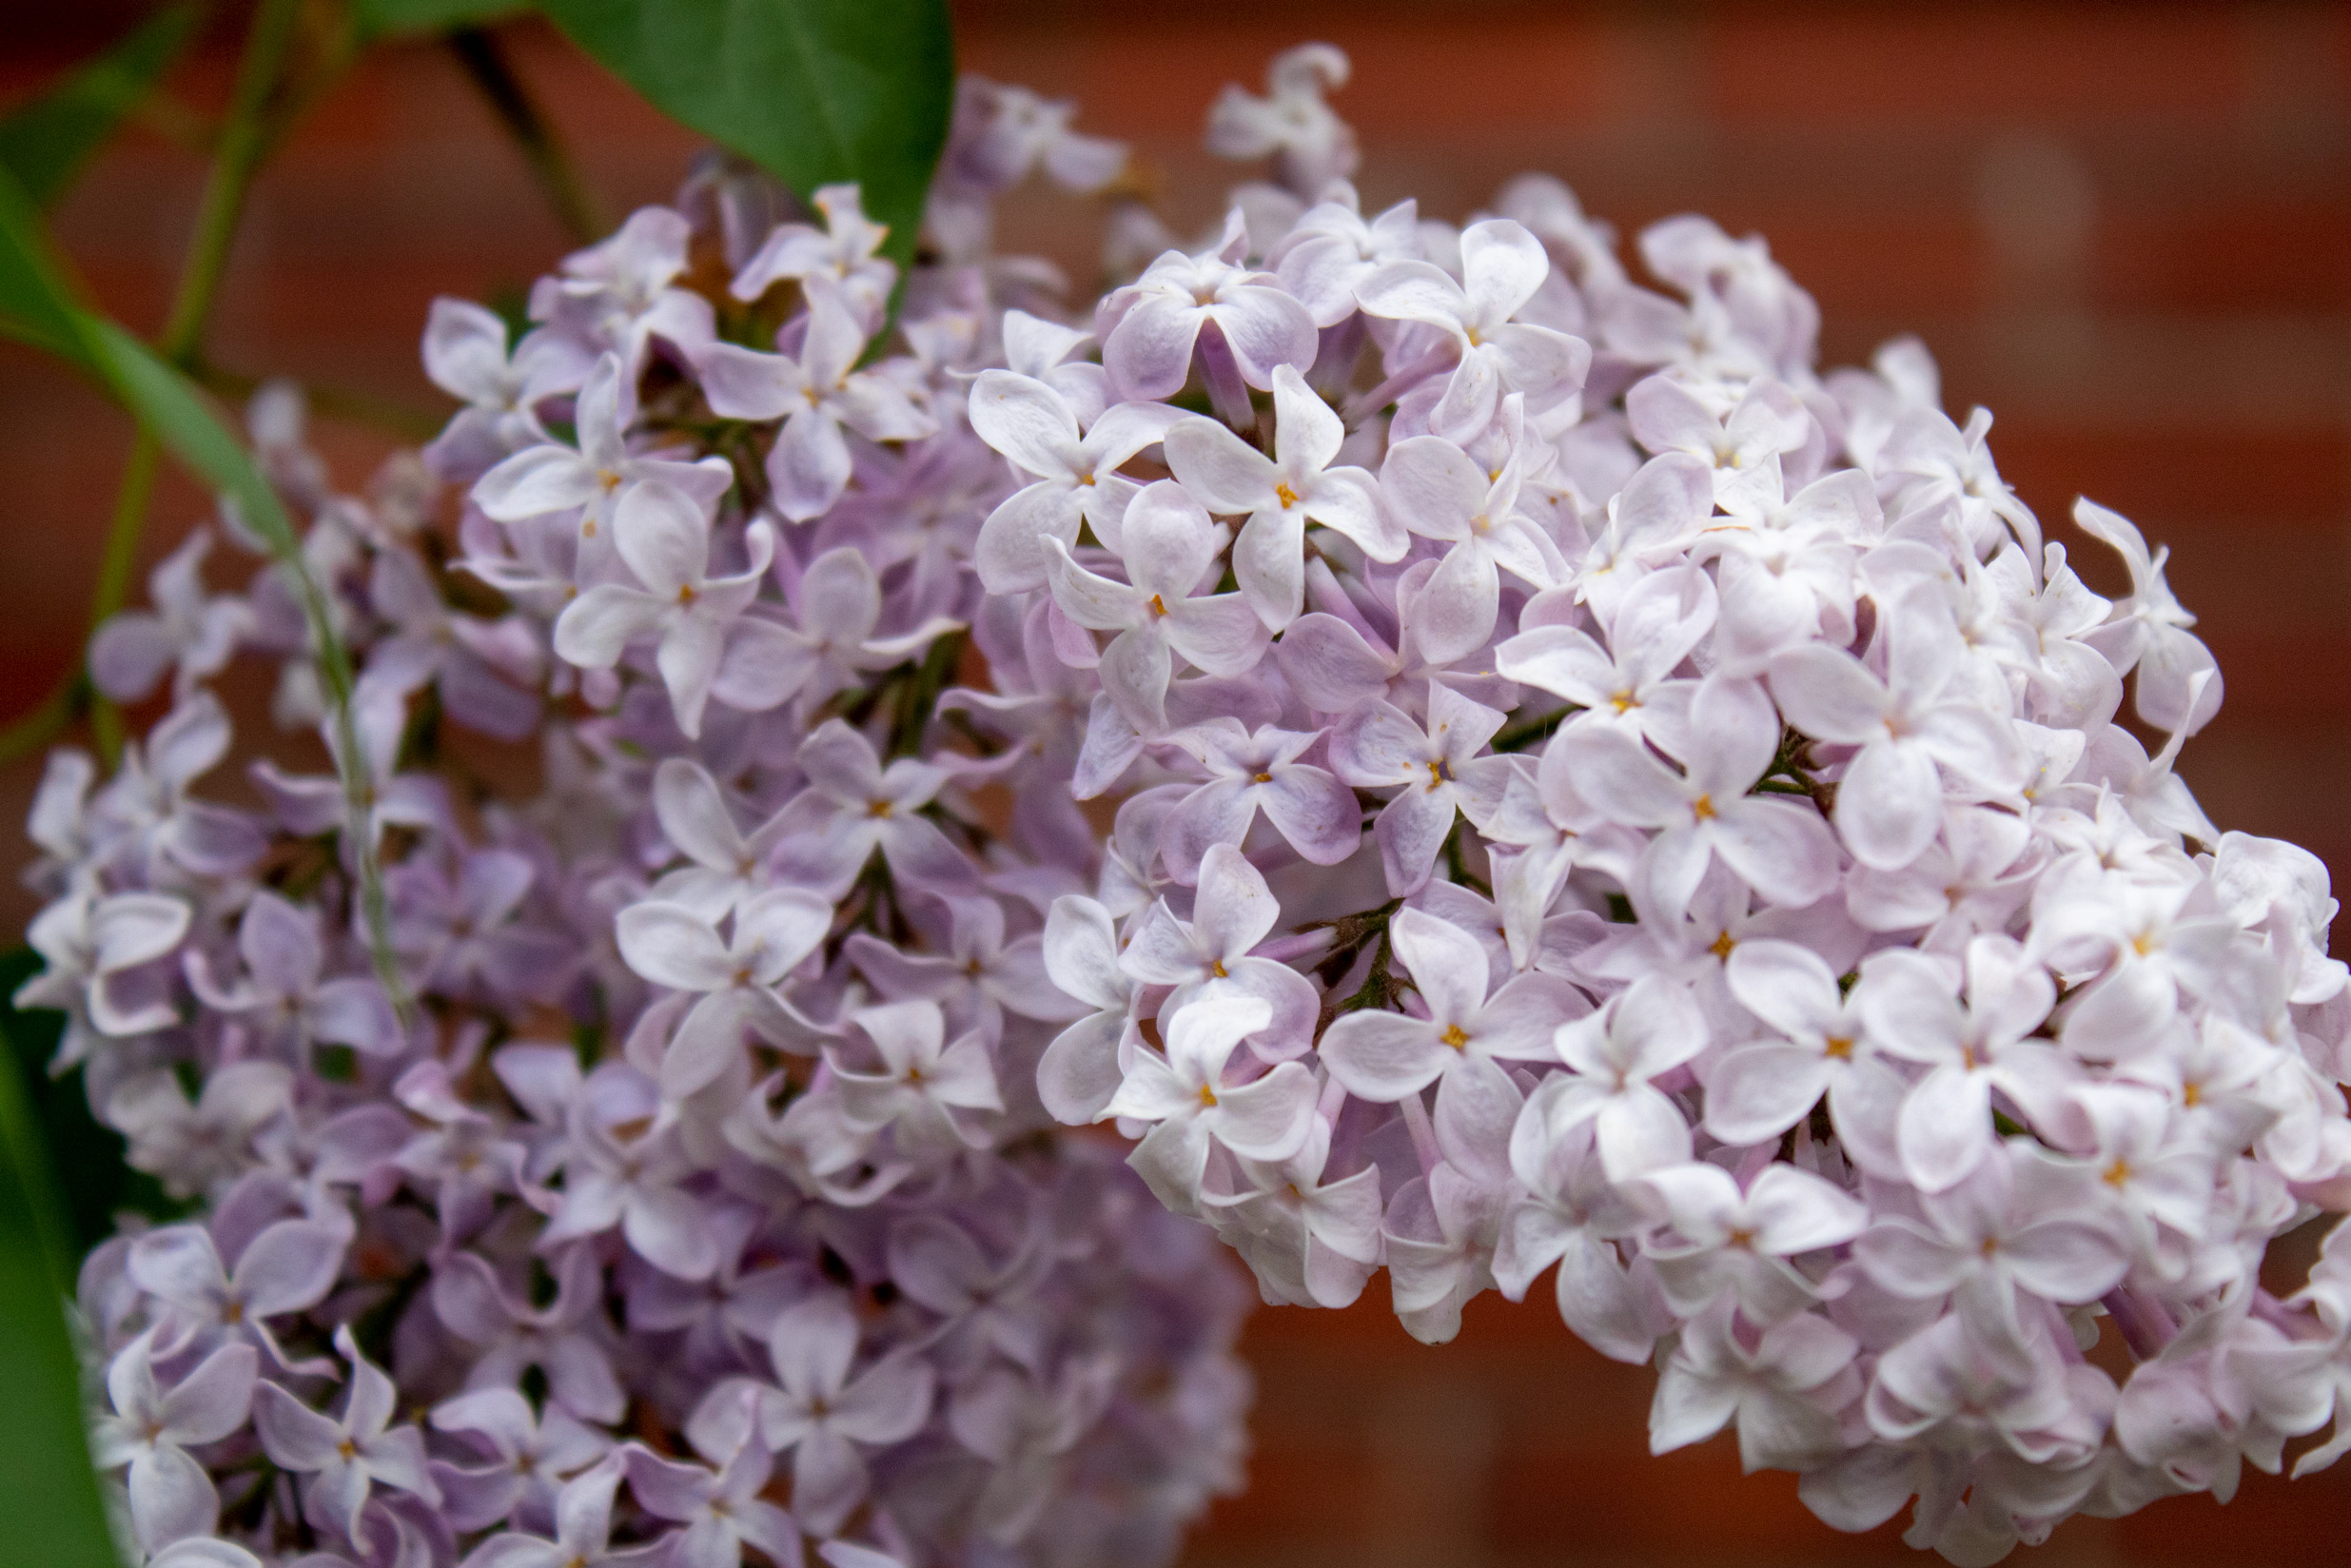 Clump of pale pink flowers on a blurred brick background